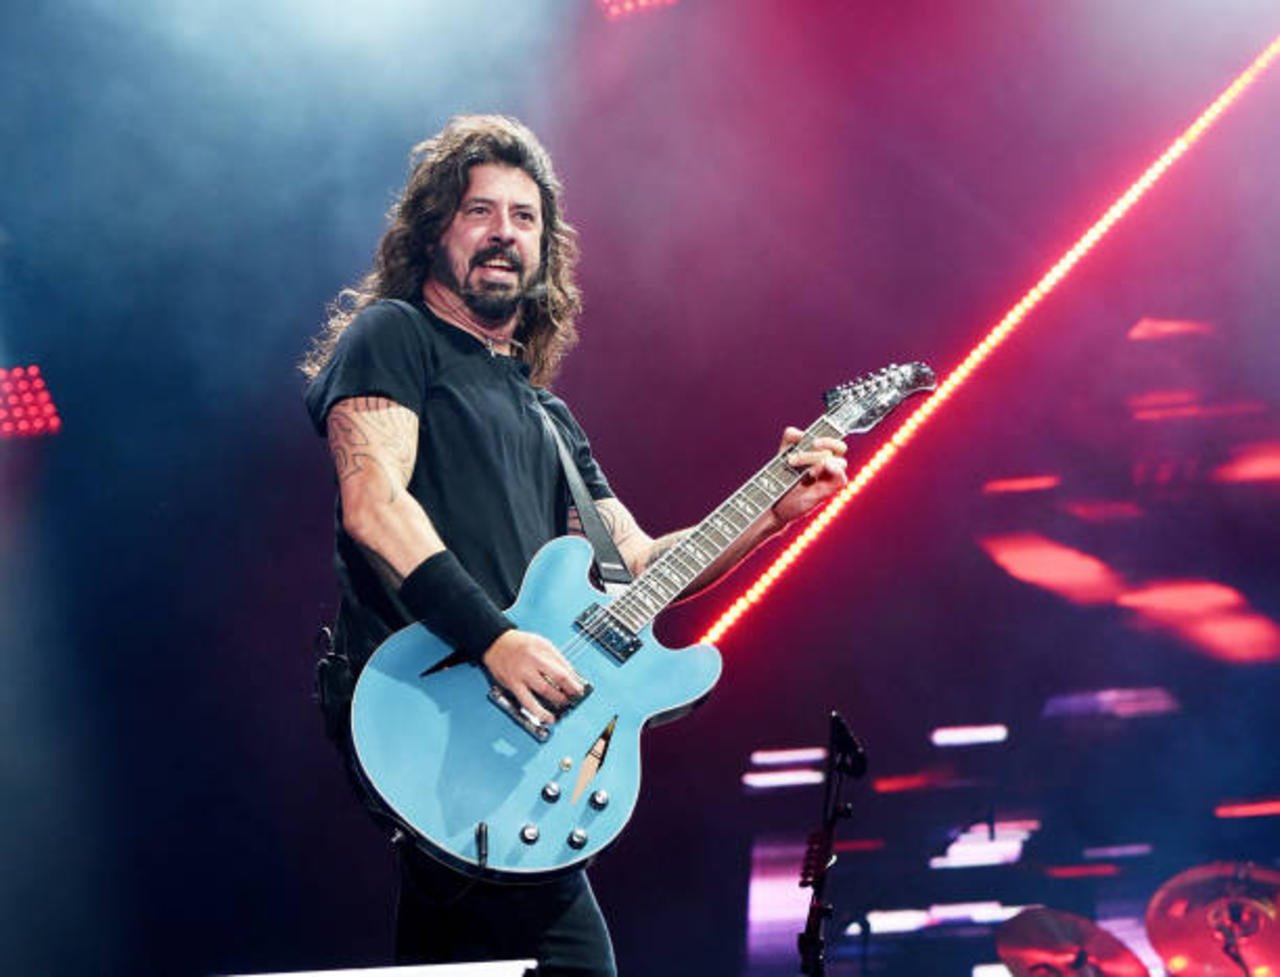 Happy Birthday, Dave Grohl! (Saturday, January 14th)